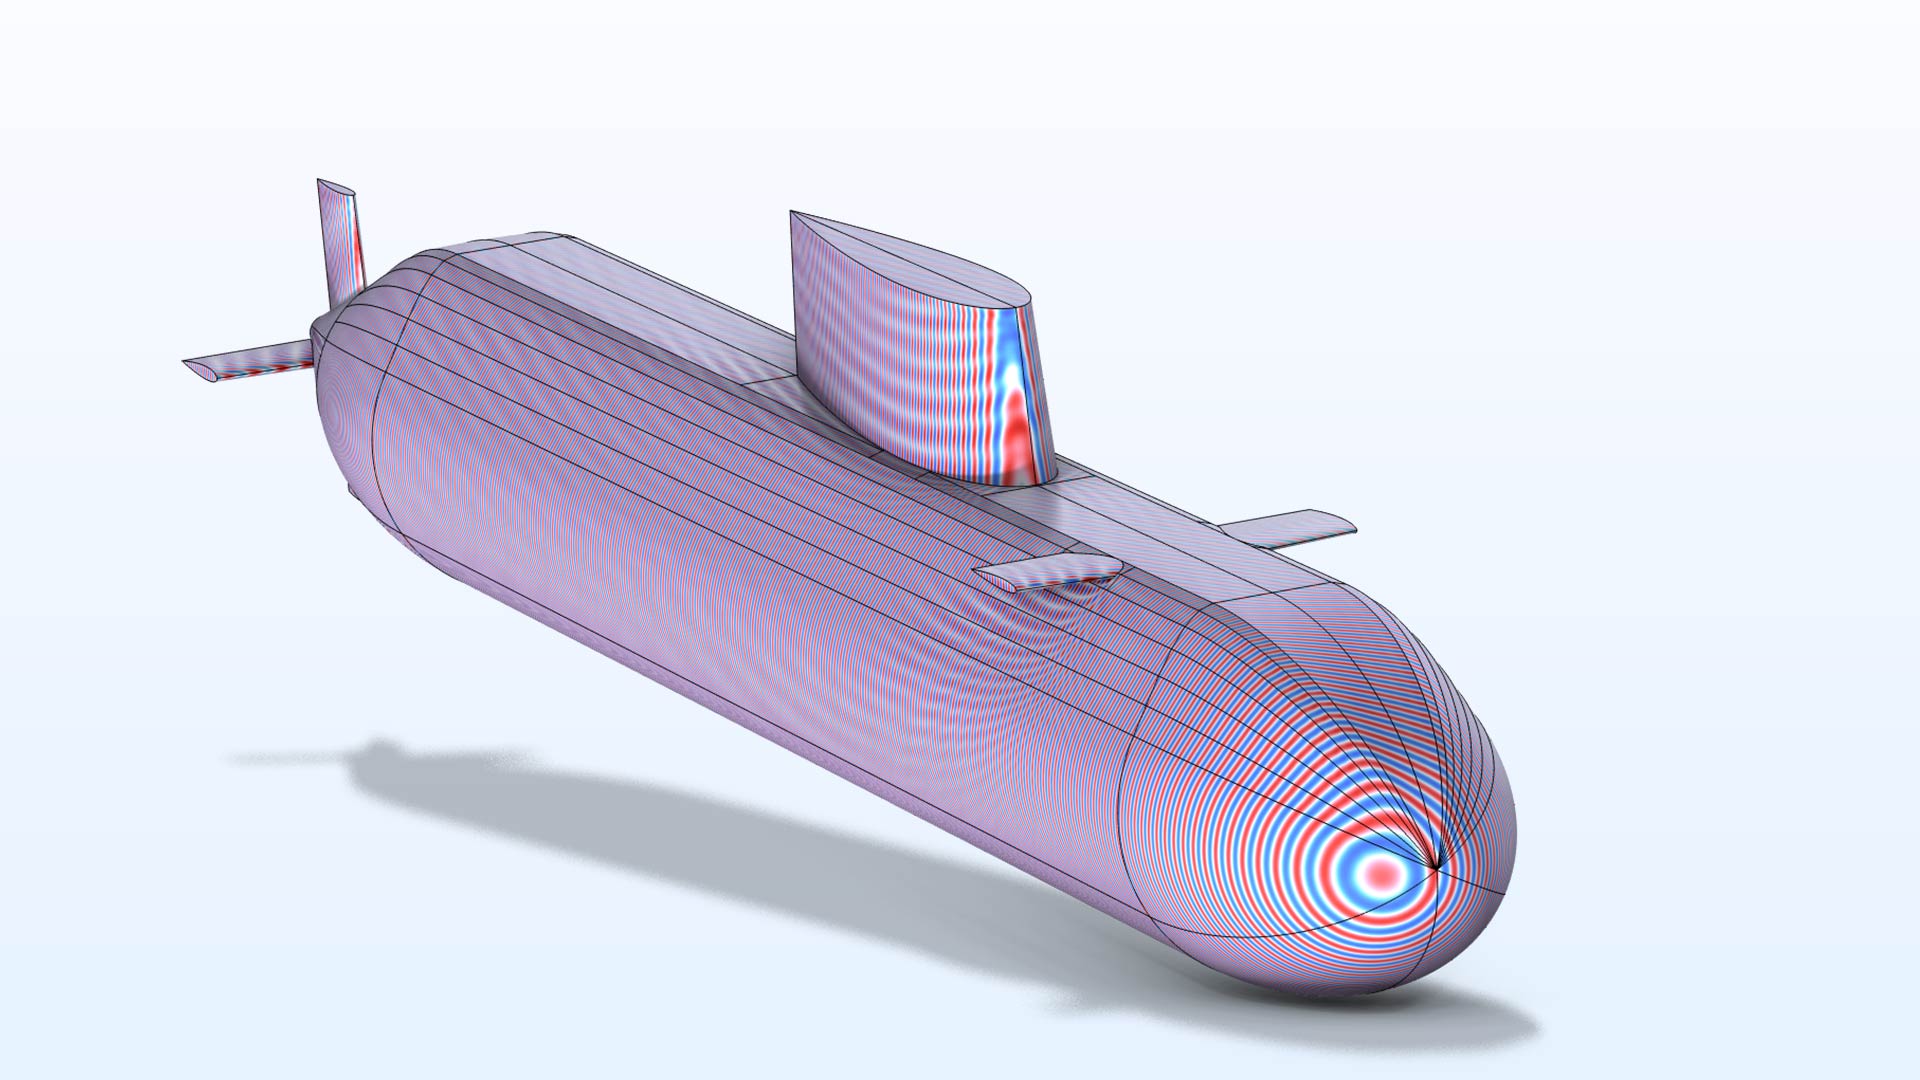 A submarine model showing the radiation pattern in the Wave color table.